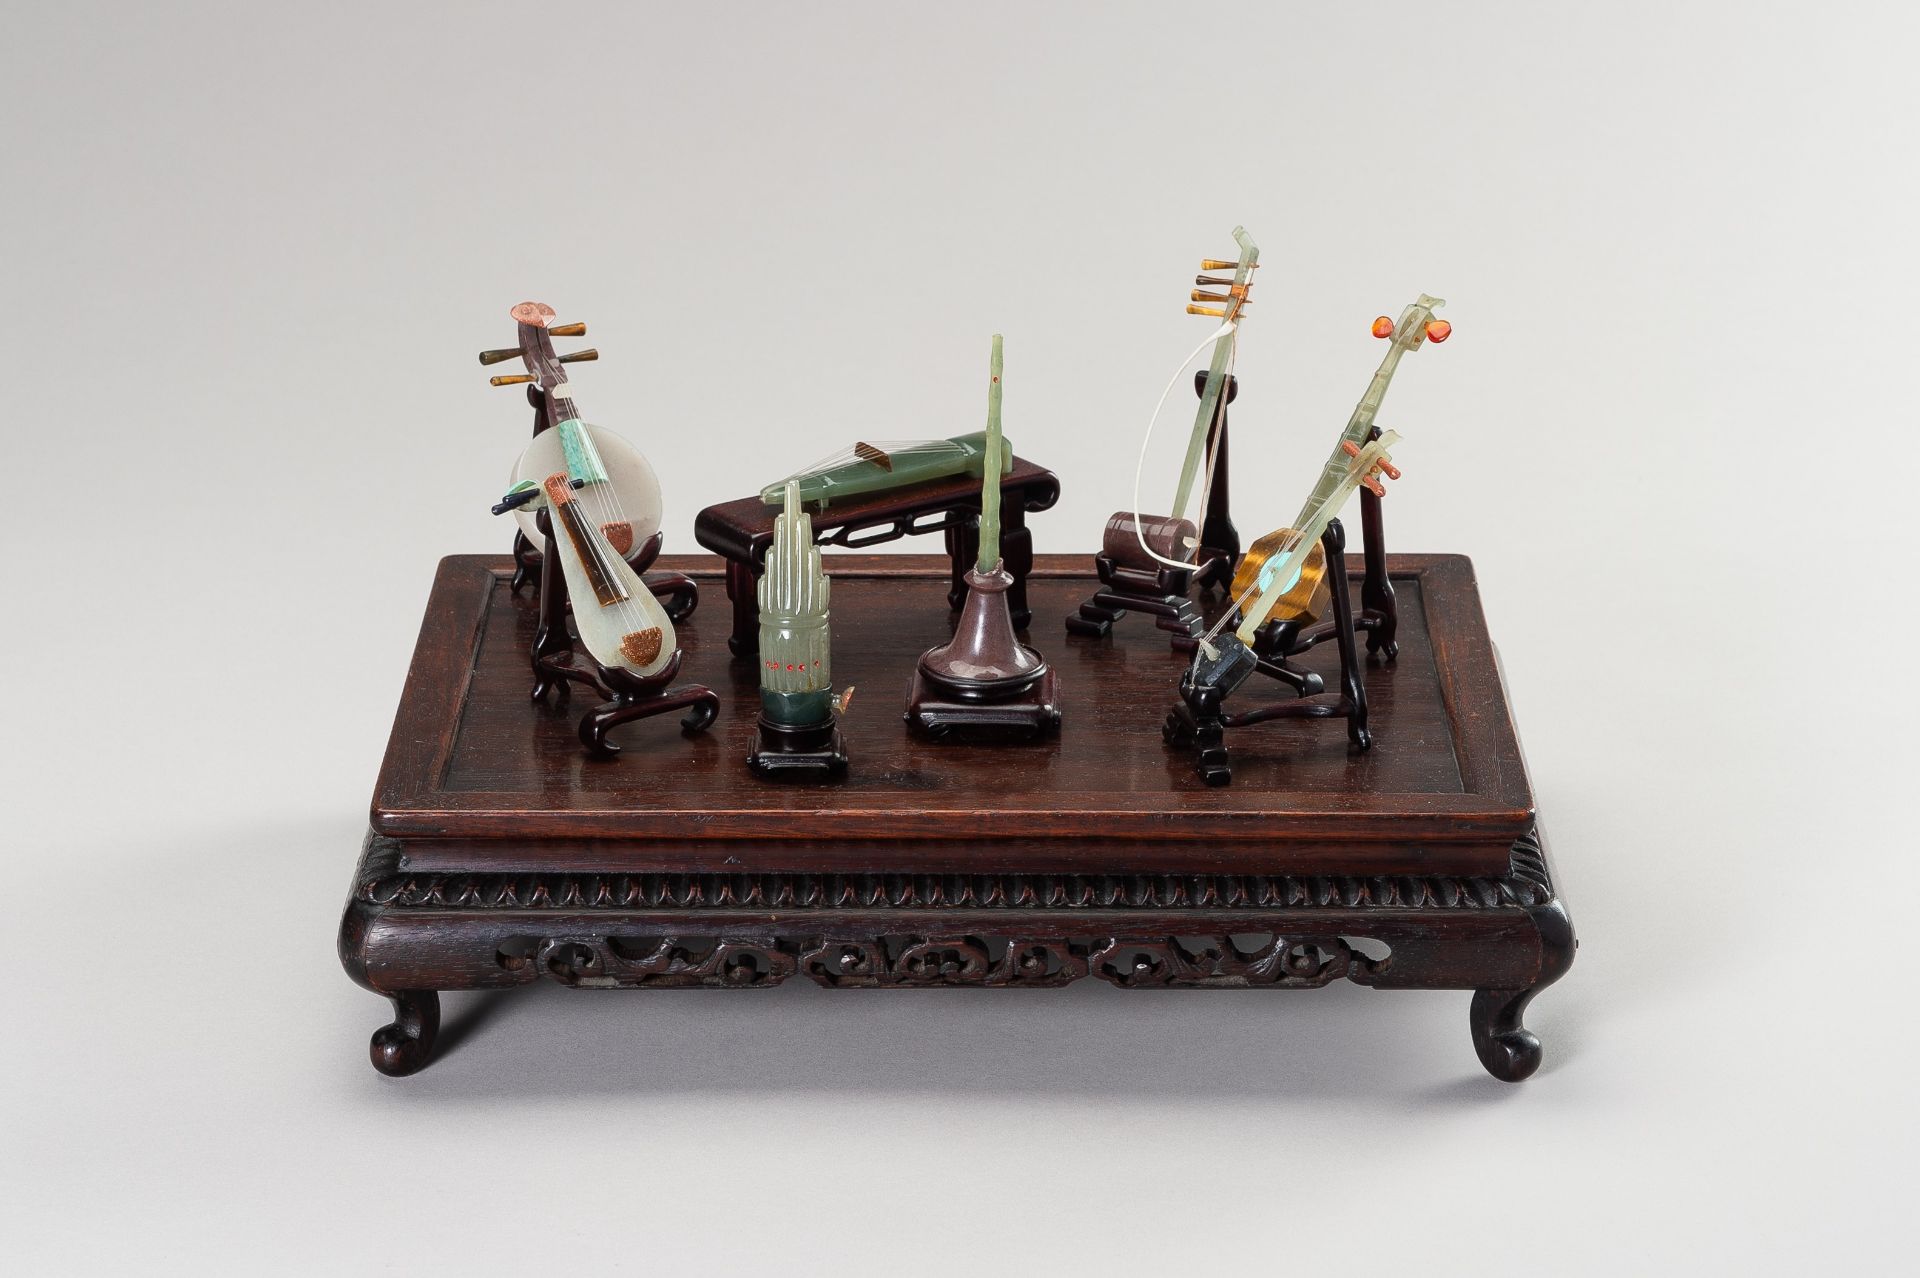 A GROUP OF EIGHT HARDSTONE MINIATURE MODELS OF MUSICAL INSTRUMENTS